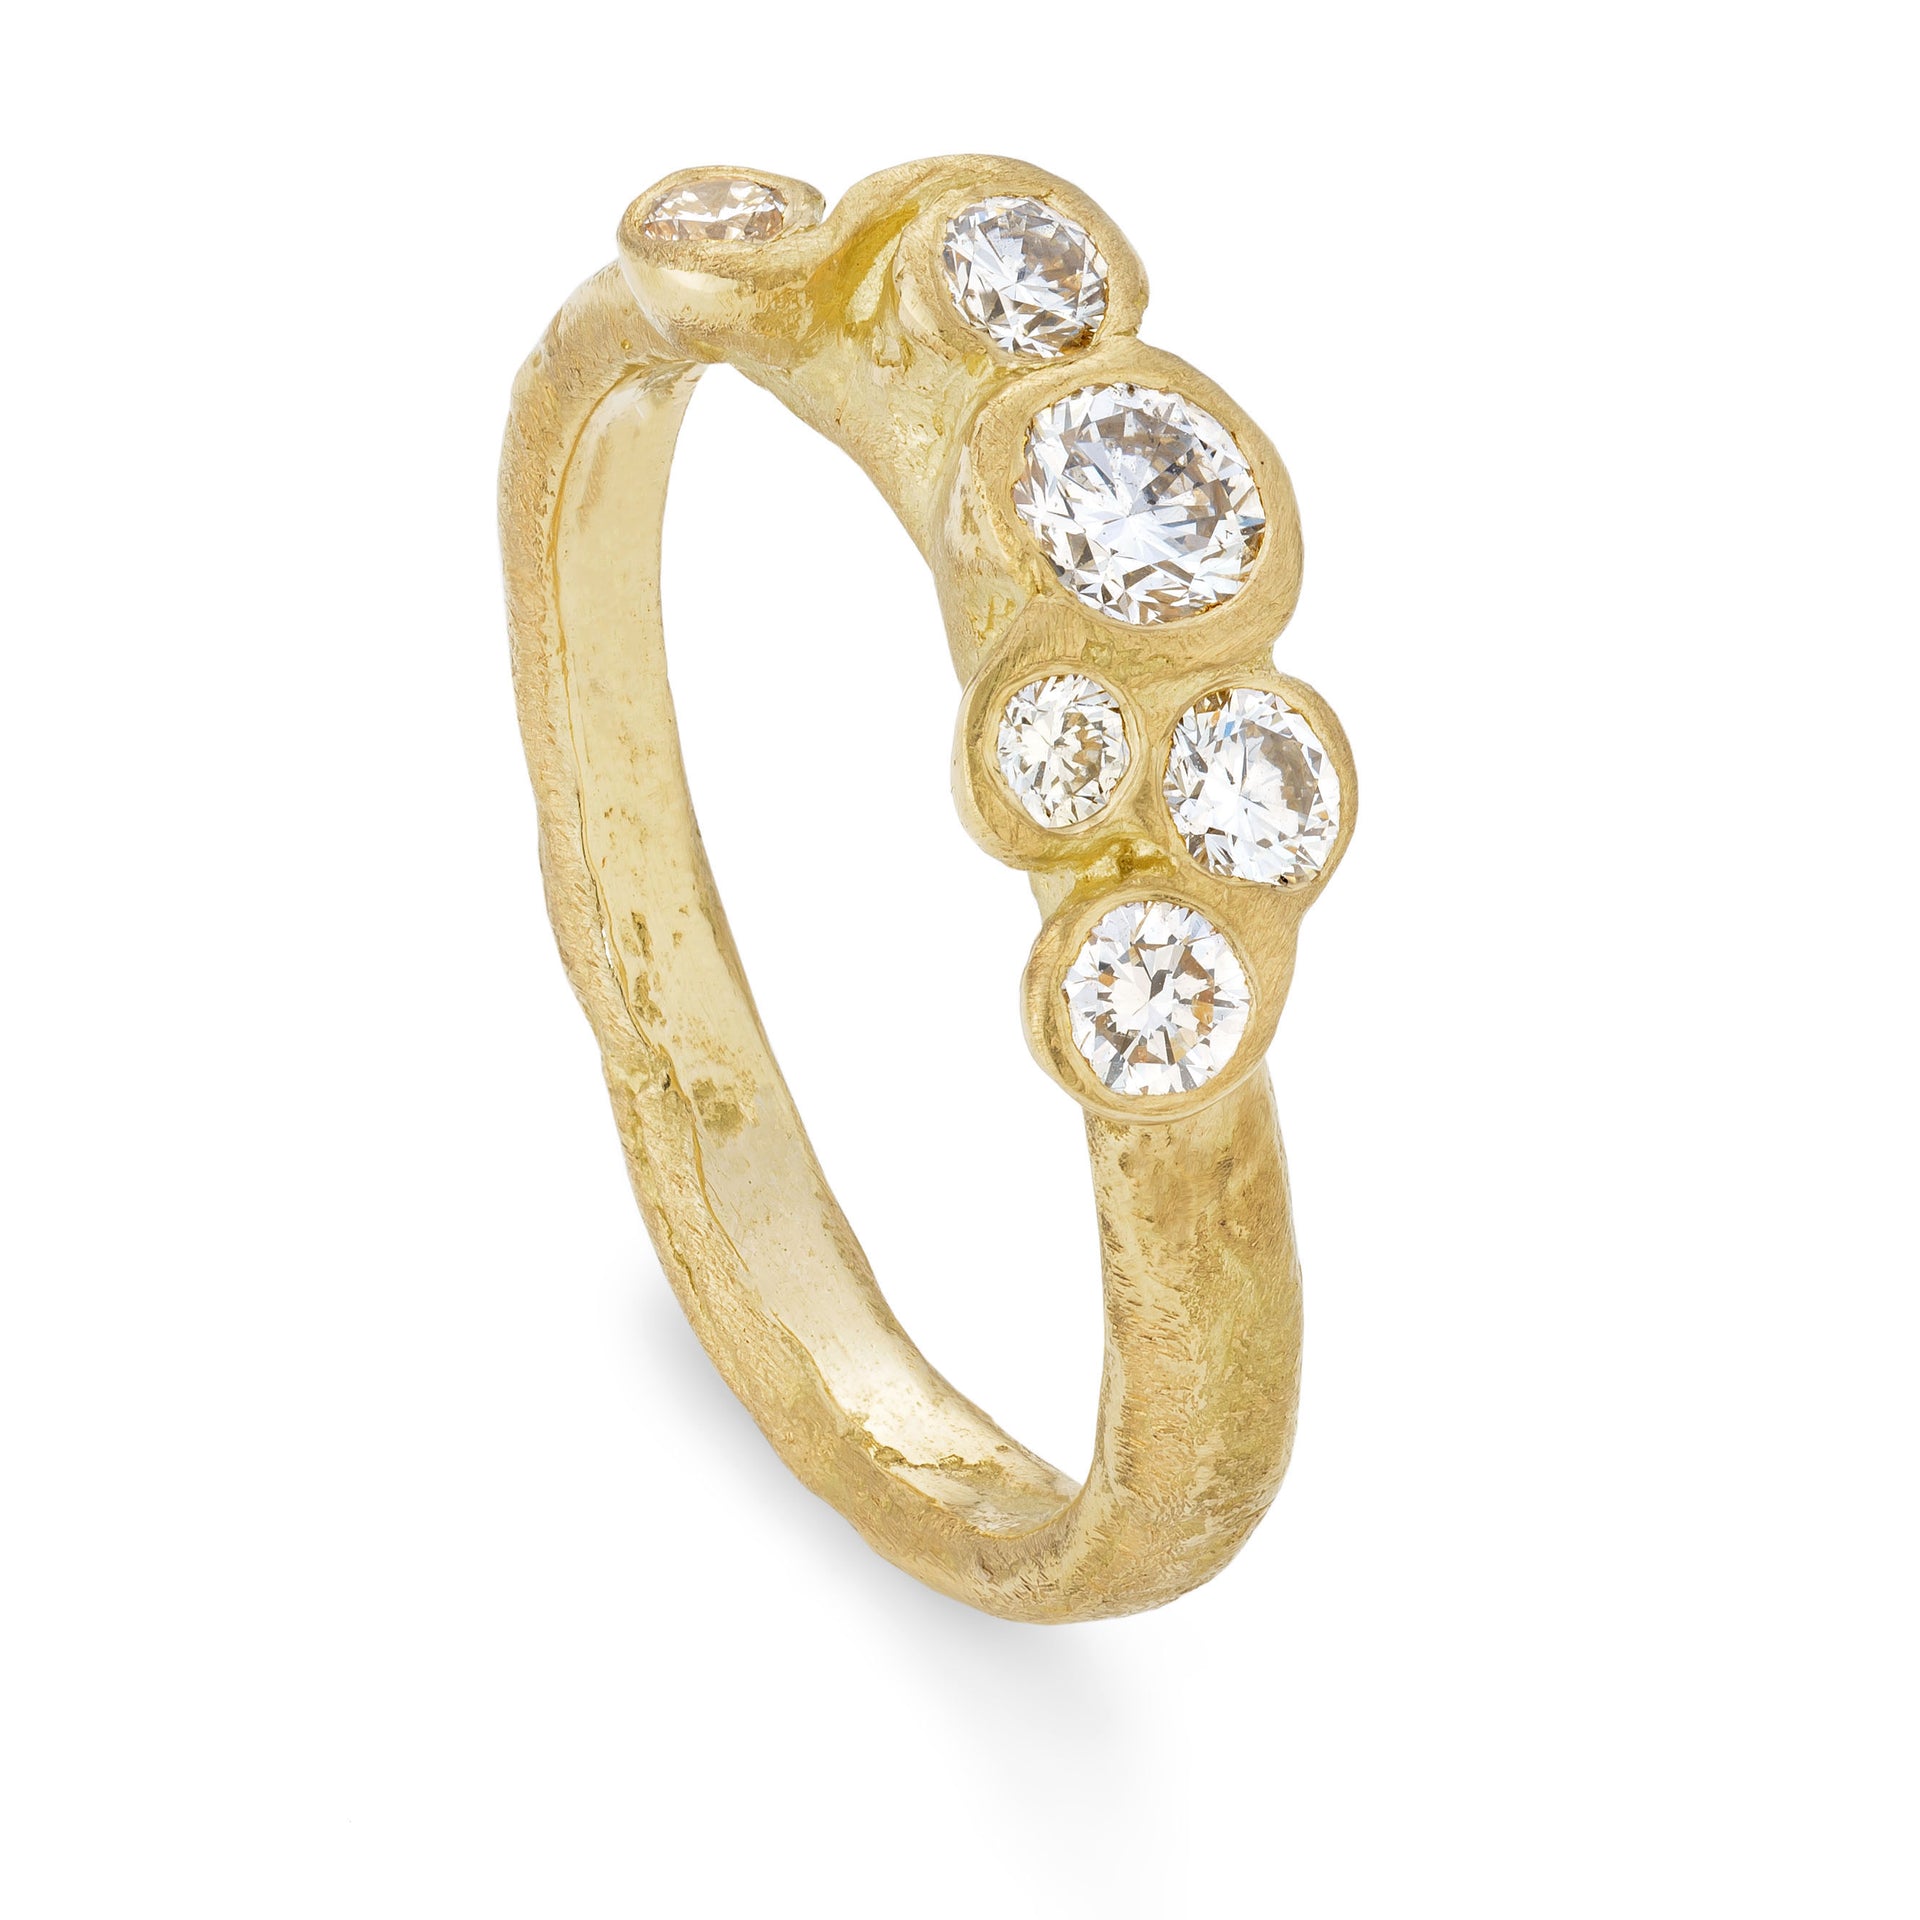 An upright front view of a handmade and alternative engagement ring. This ring has been designed and created by Emily Nixon, a Cornish jeweller.